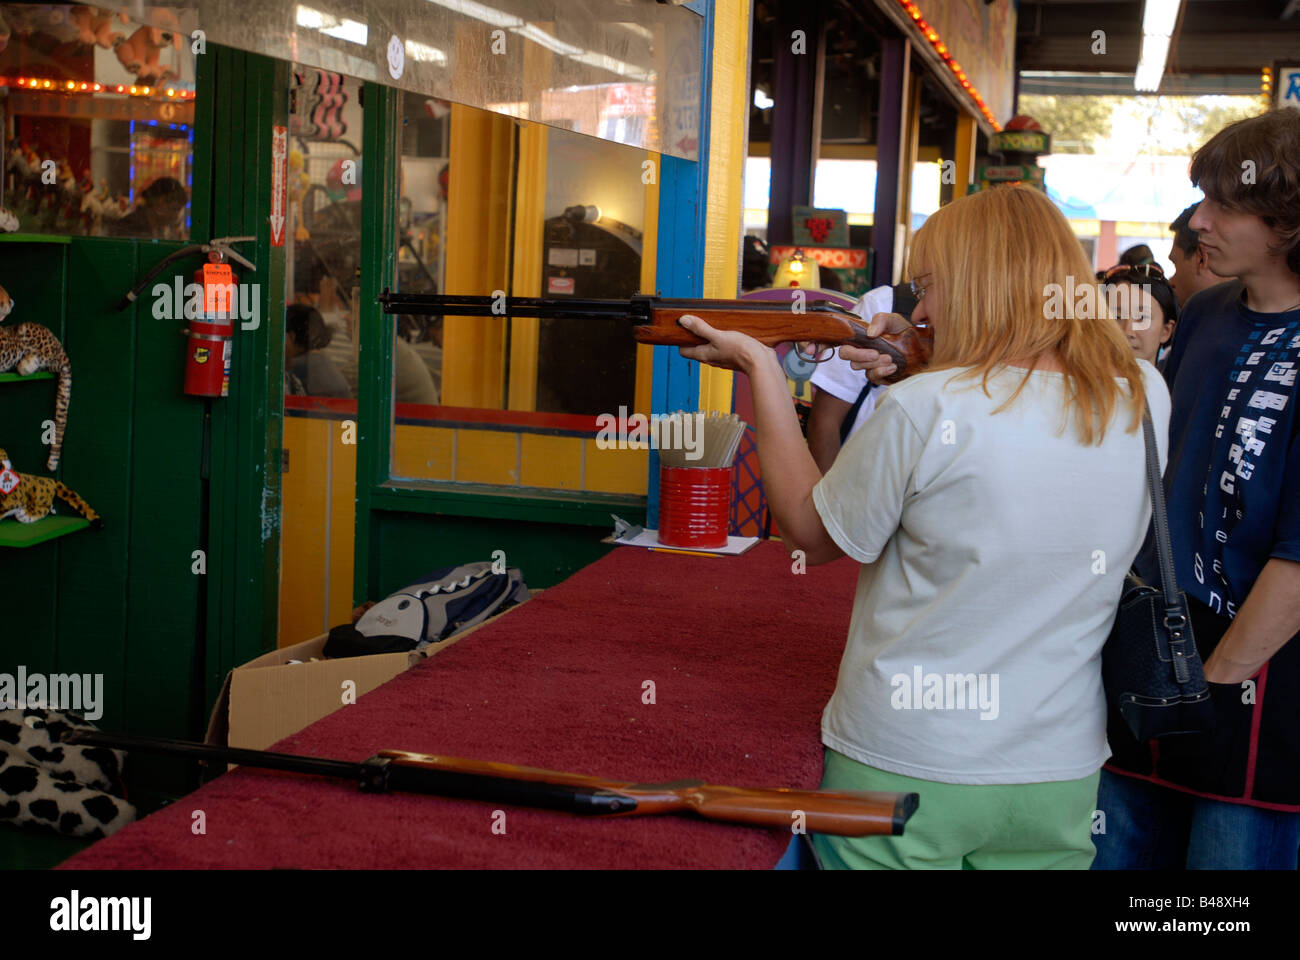 A visitor shoots for prizes in an arcade in Astroland in Coney Island in the Brooklyn borough of New York Stock Photo